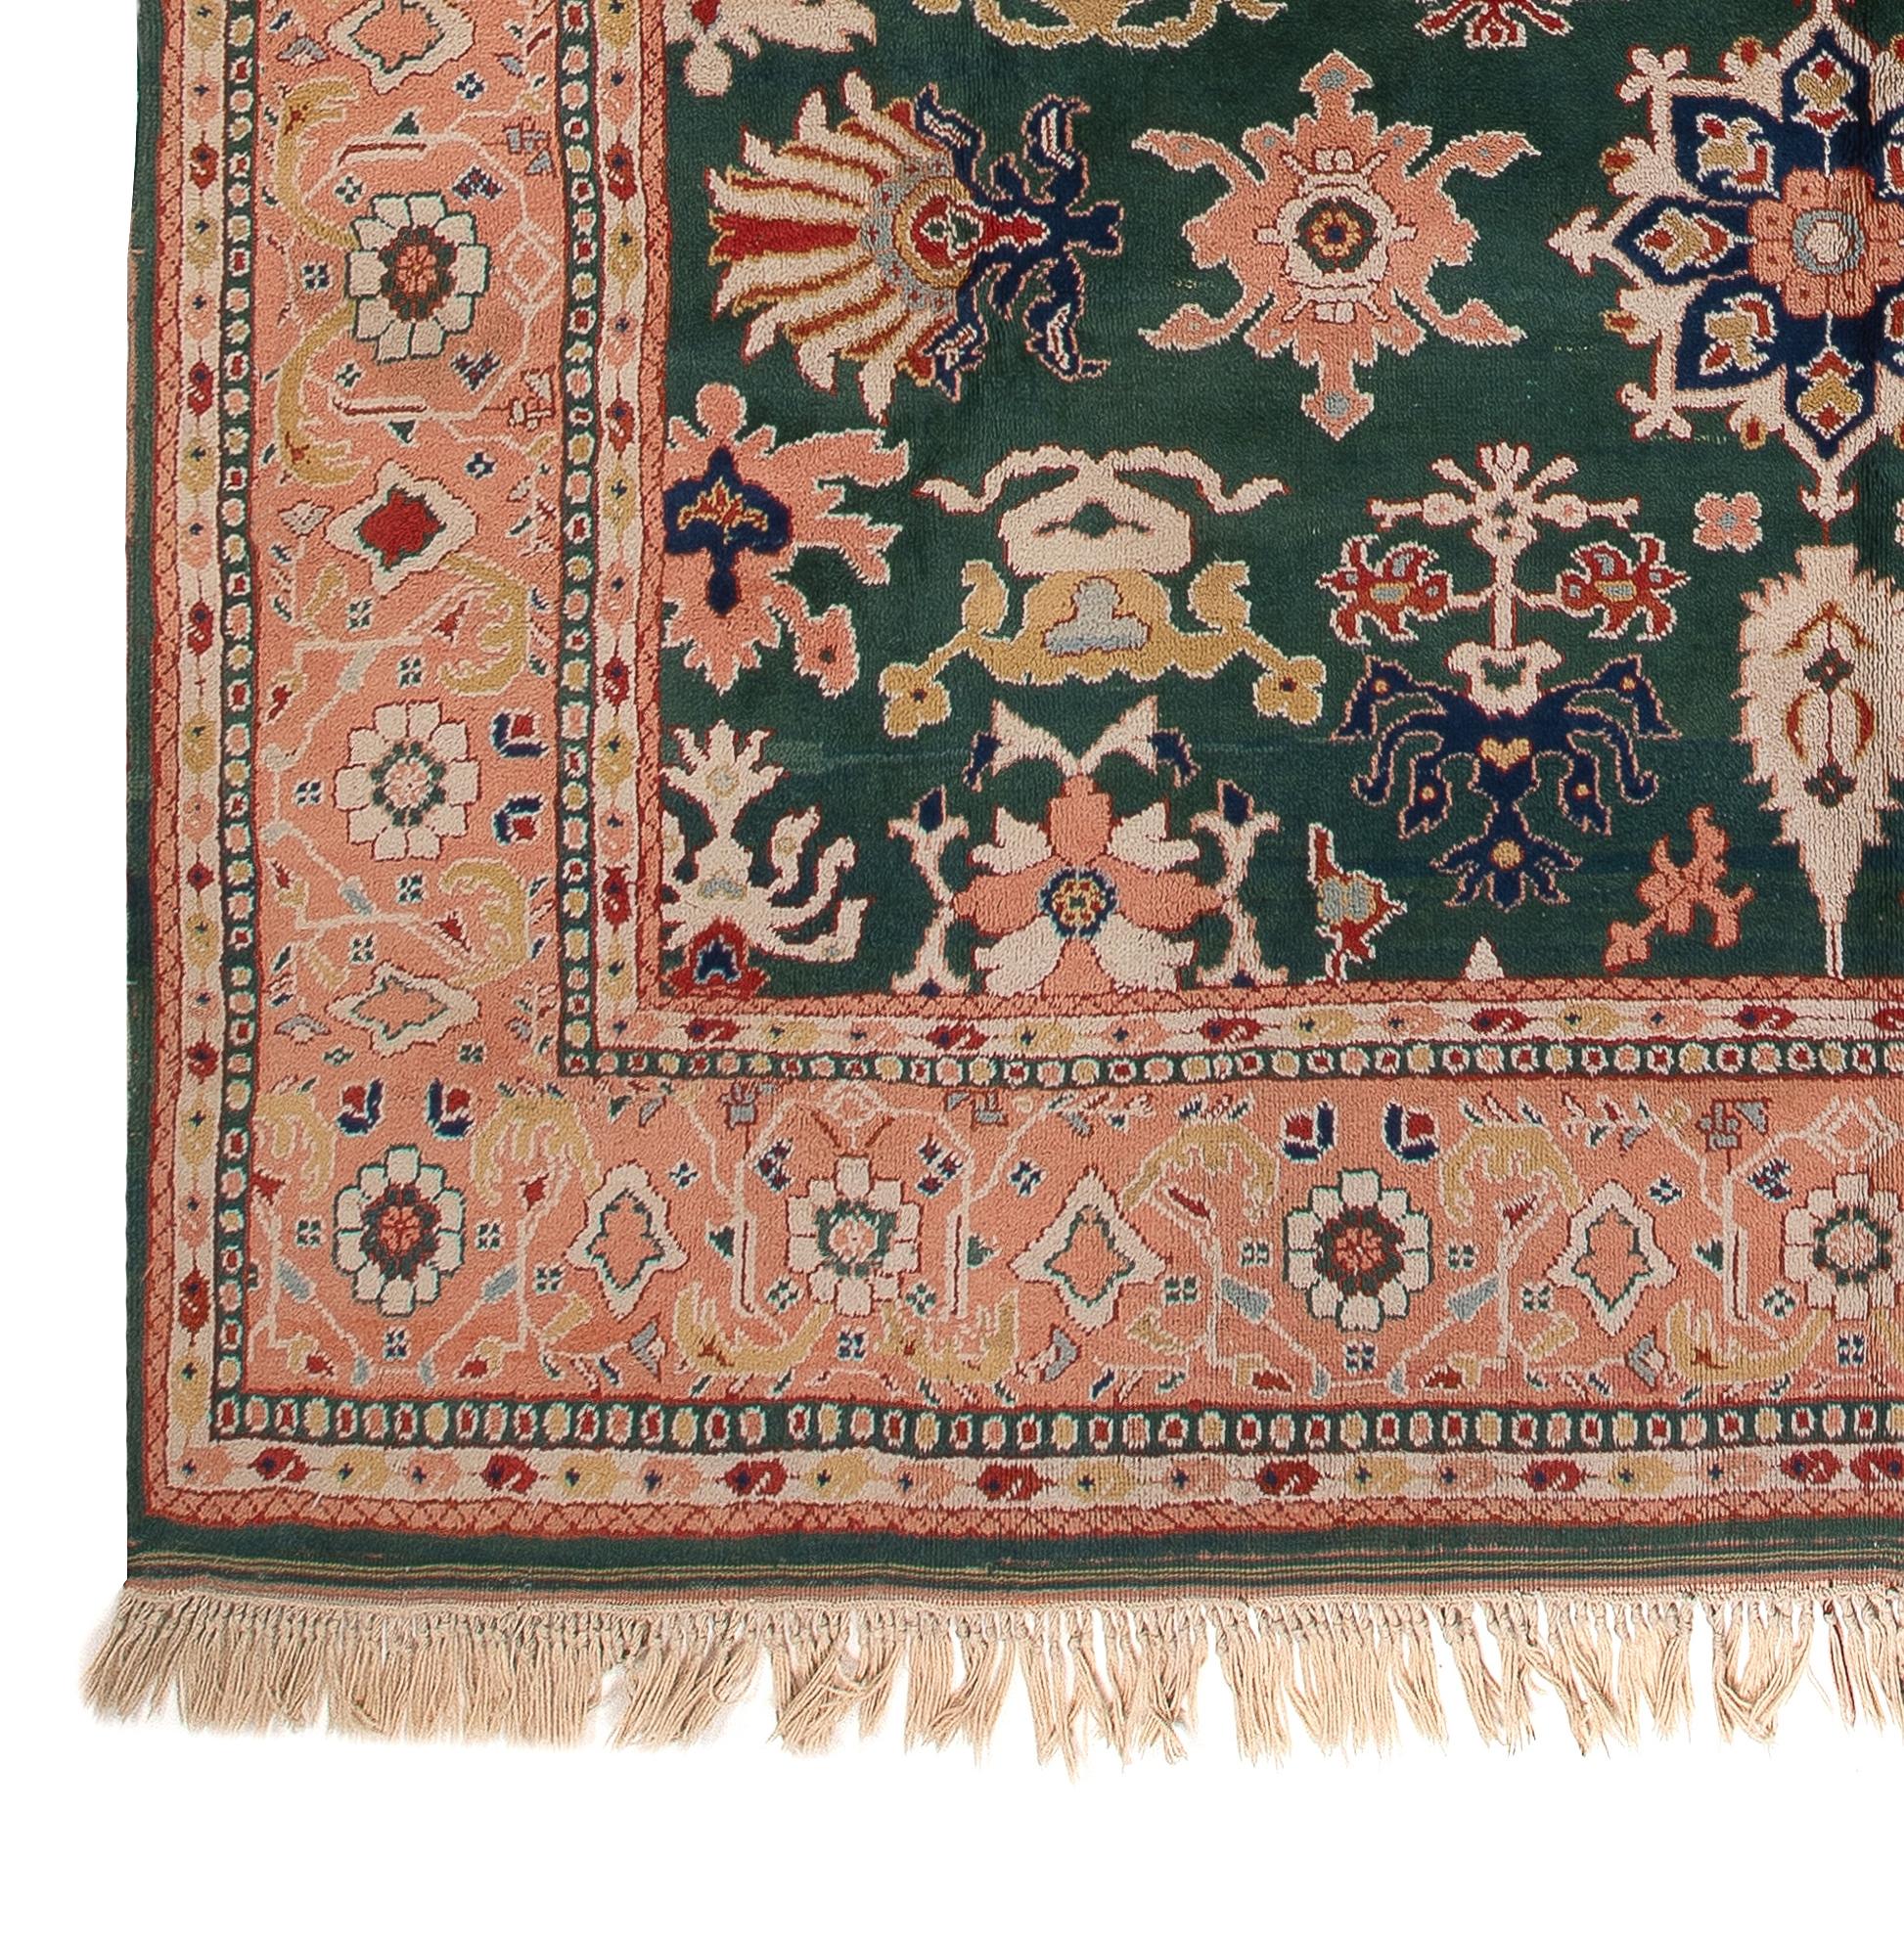 Sultanabad 8.4x10.2 Ft Emerald Green and Peach Turkish Rug, 100% Wool & Natural Dyes